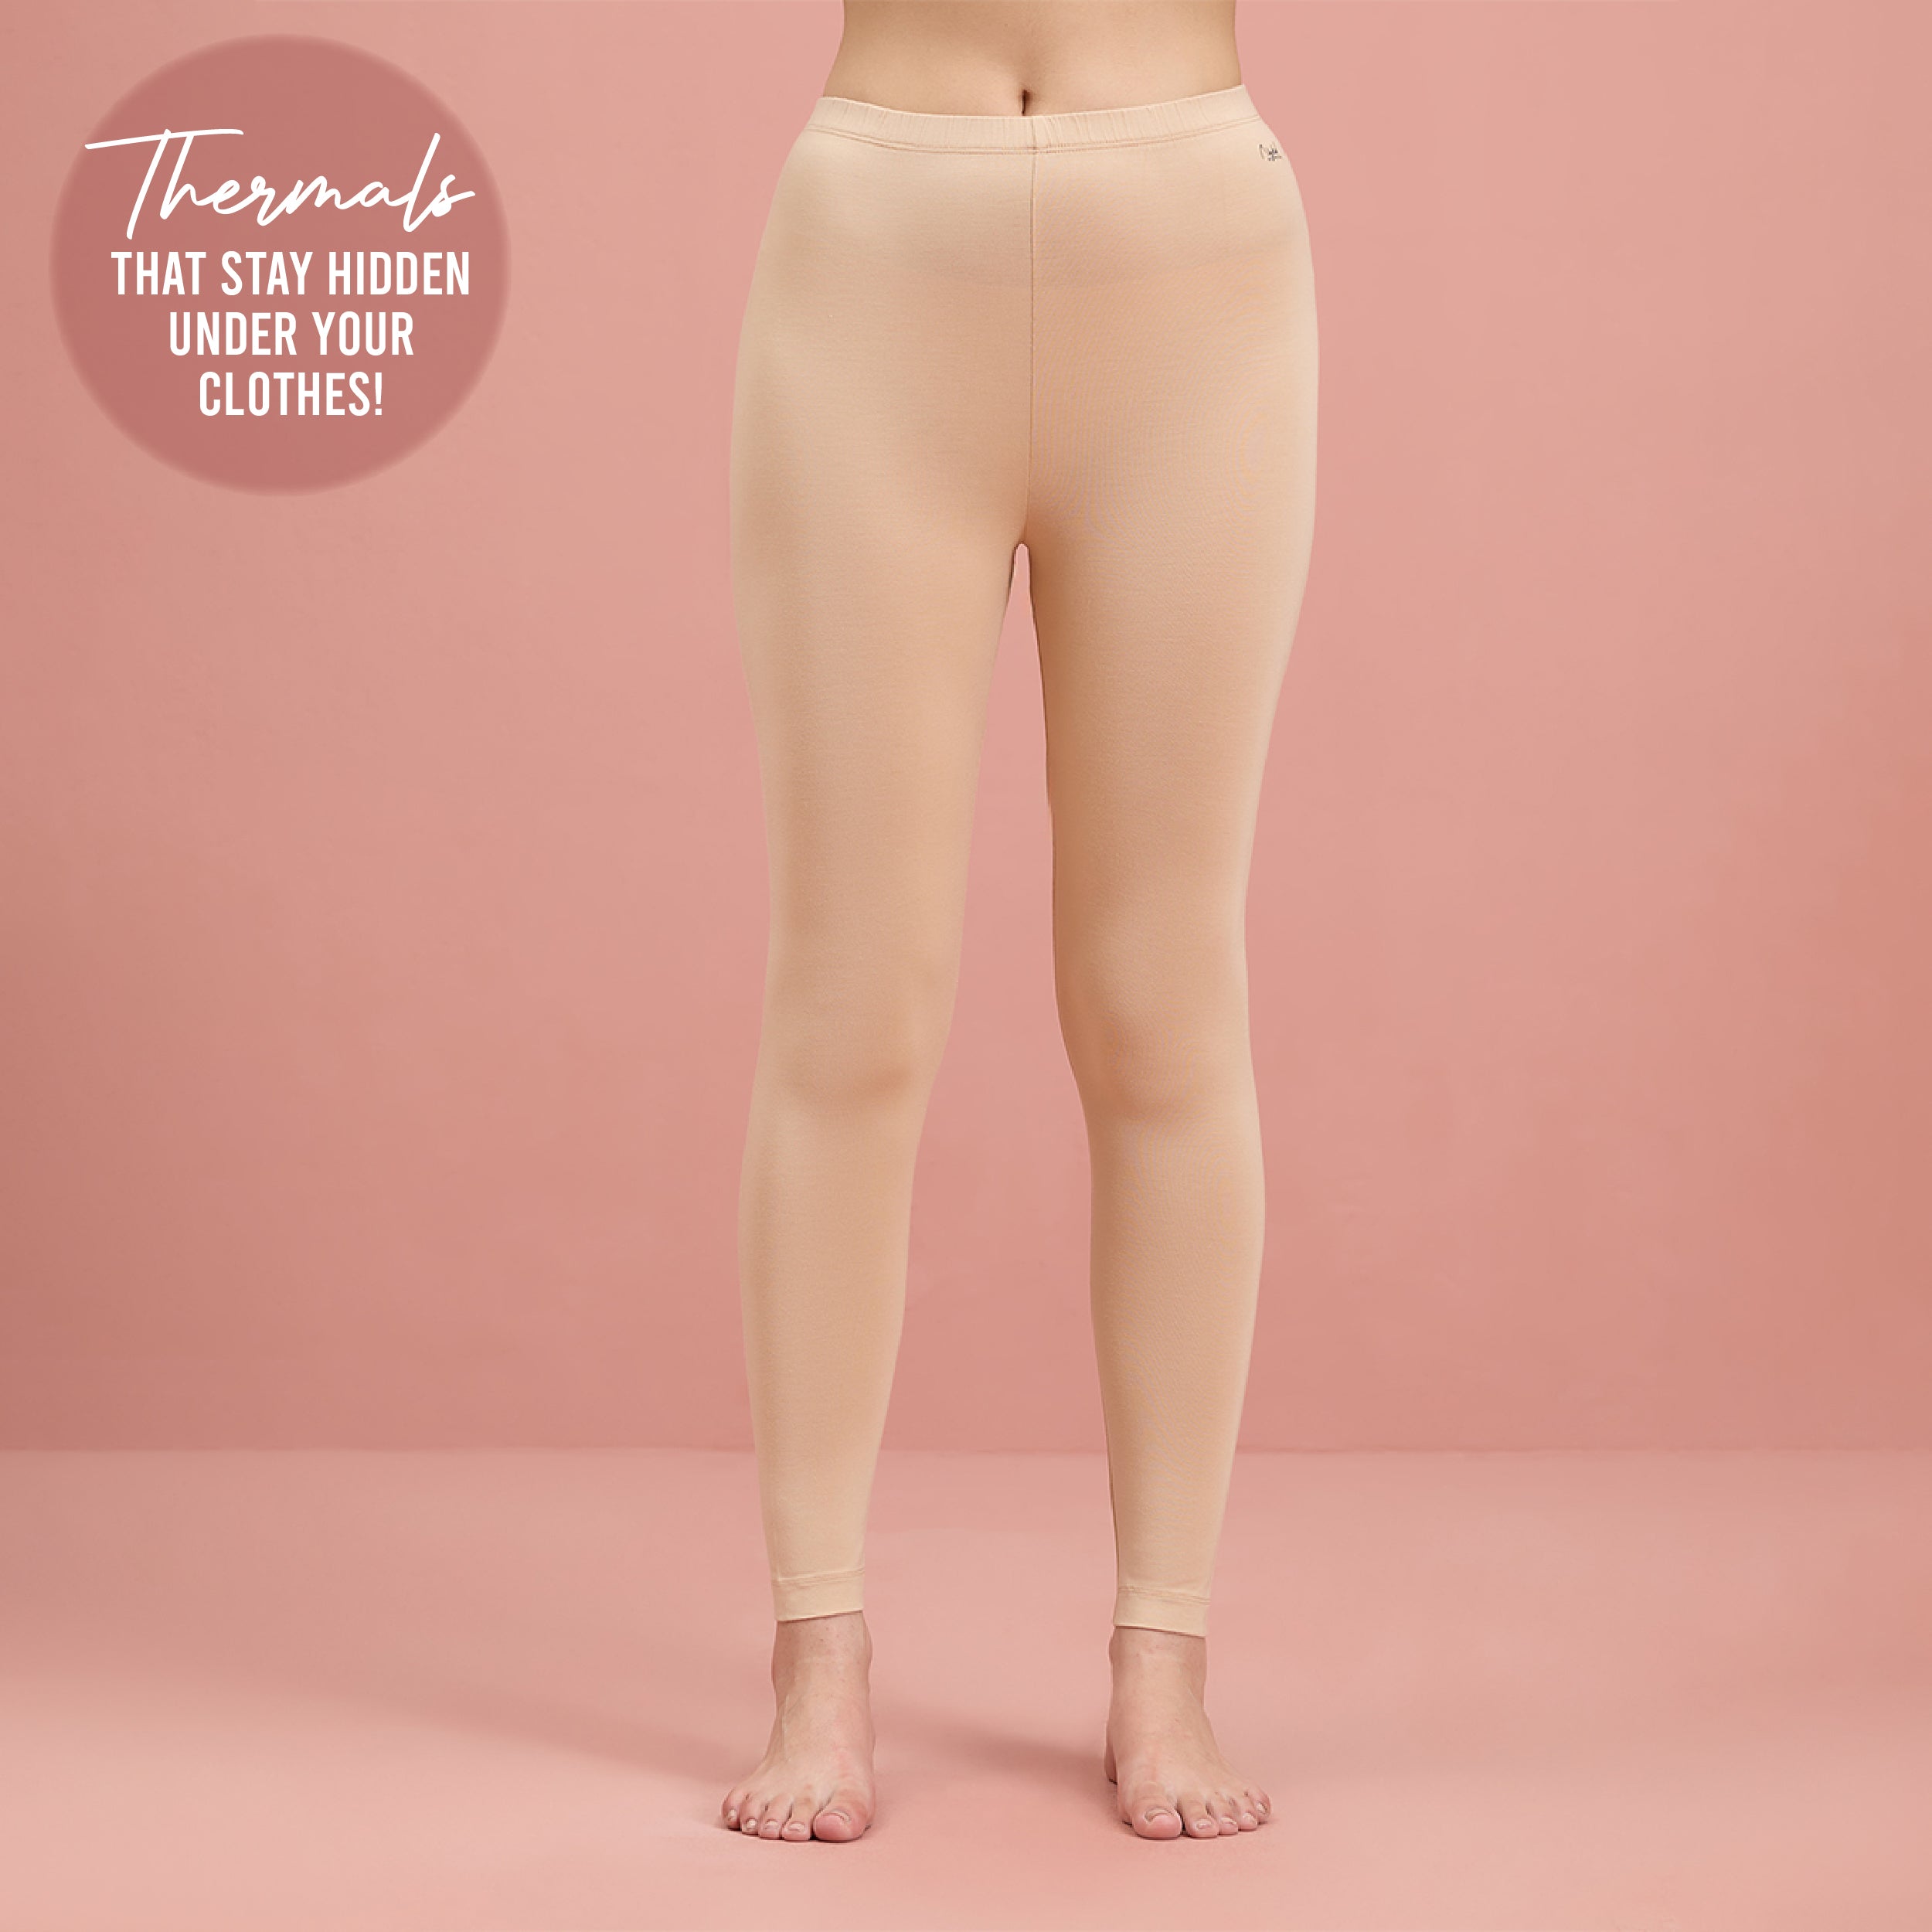 Ultra Light and Soft Thermal Leggings that stay hidden under